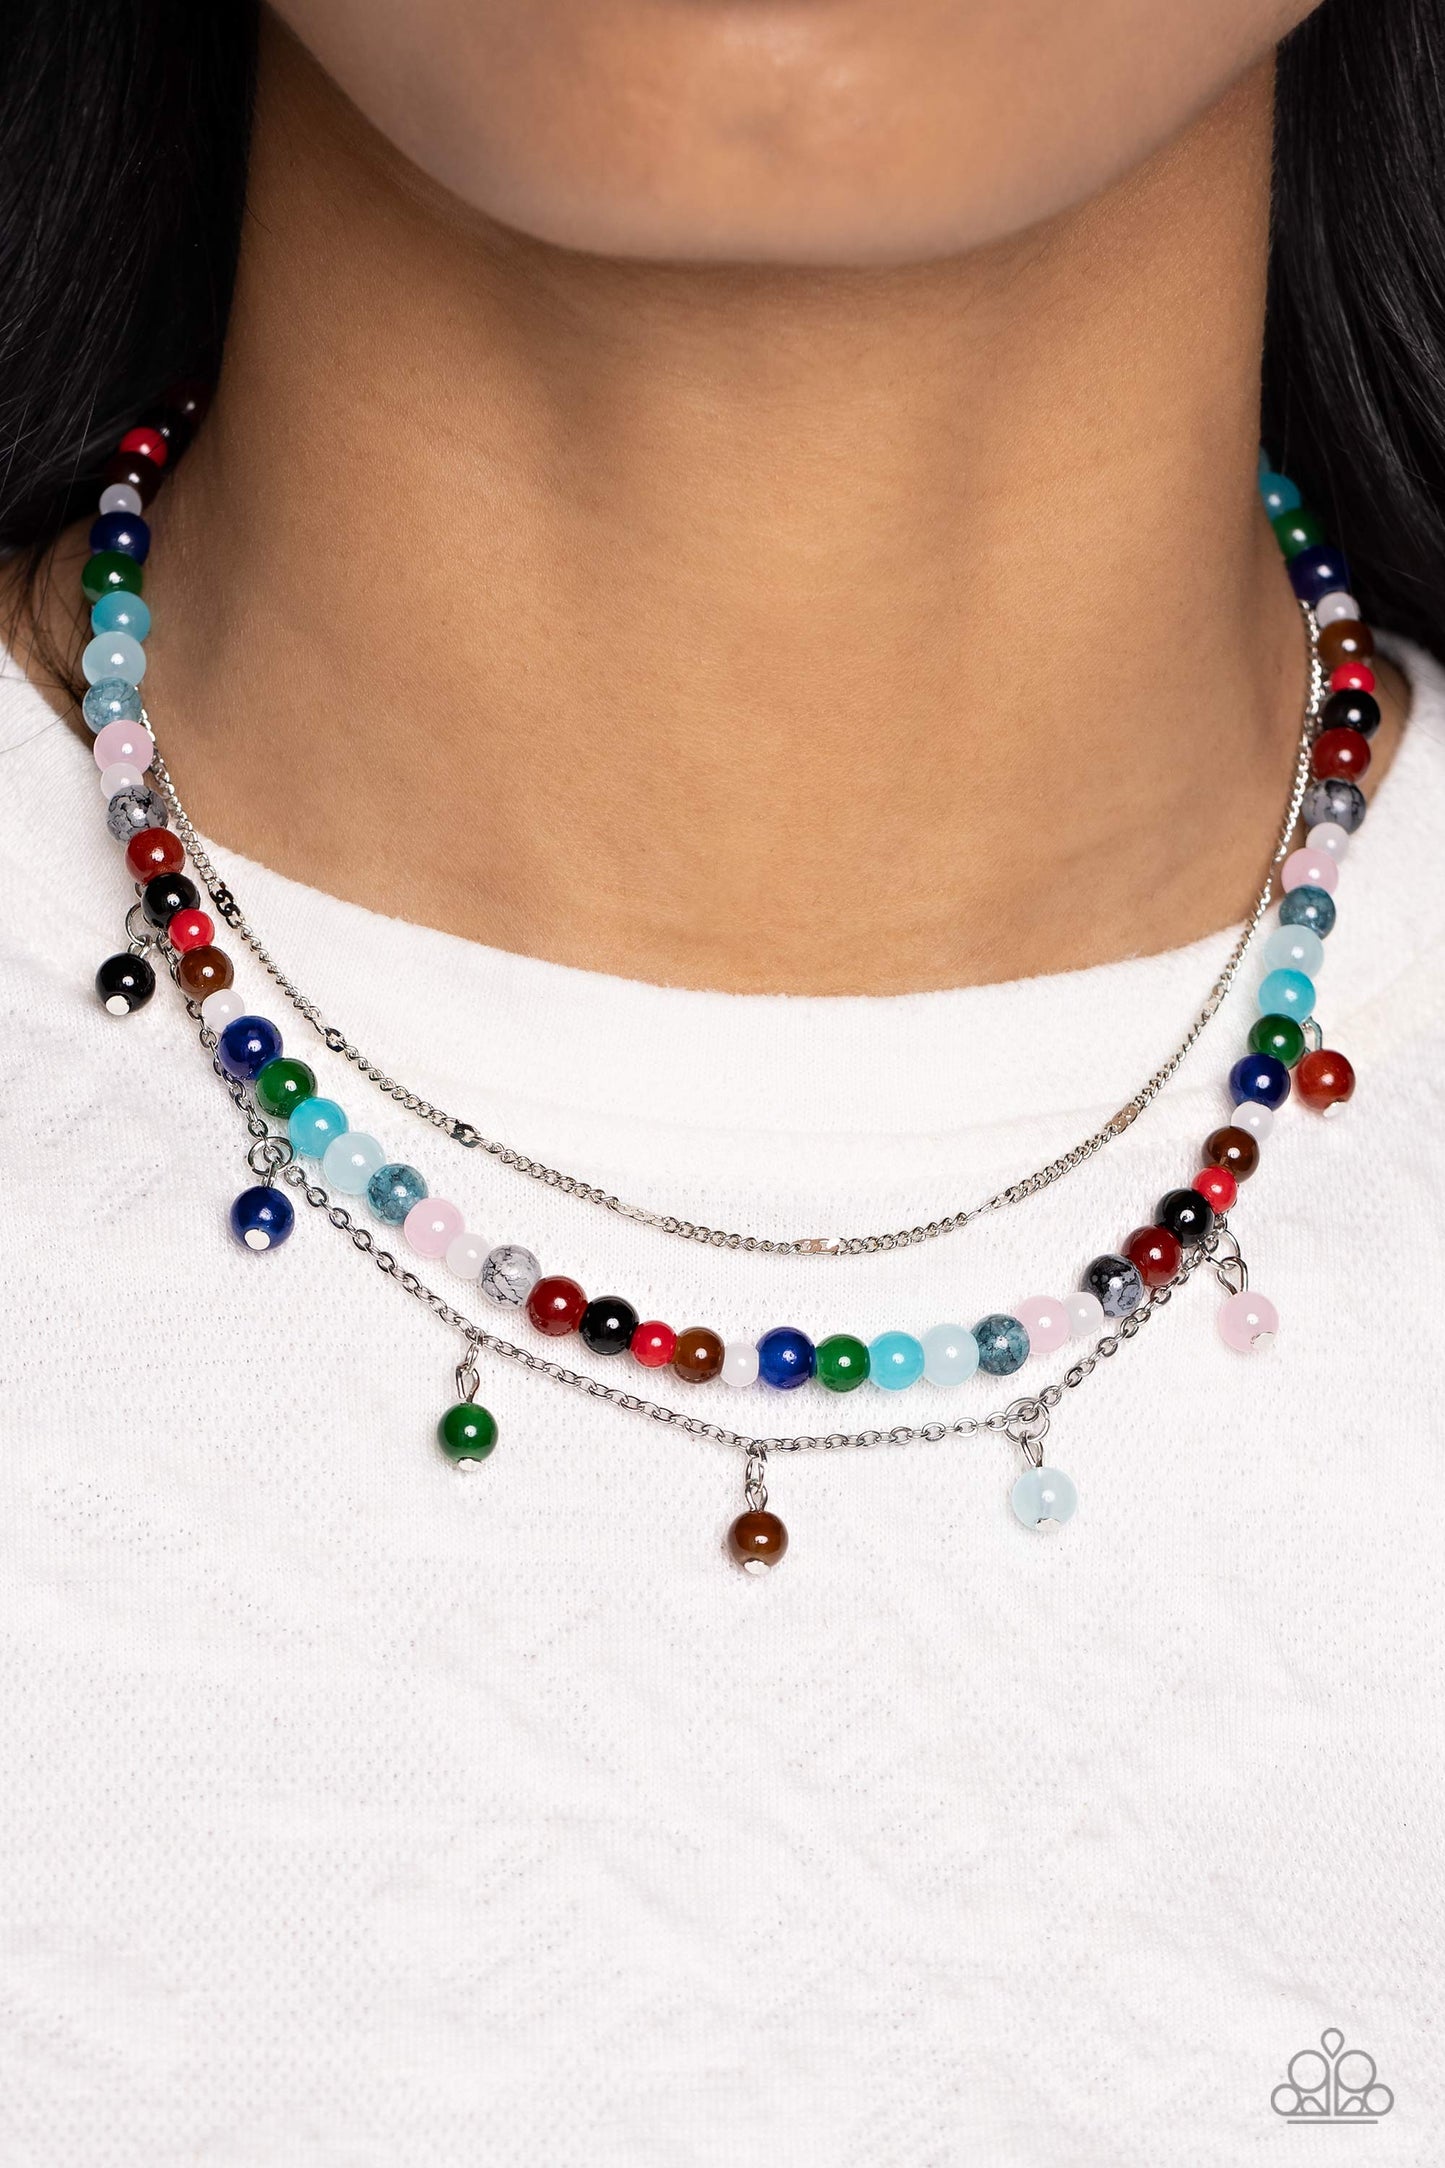 Paparazzi Accessories - BEAD All About It - Multi Necklaces a strand of multicolored stone beads is paired with two strands of classic silver chain, creating effortless layers along the neckline. One of the silver chains is dotted with sections of flattened silver bars, while the other is adorned with a sampling of colorful stone beading that infuses the design with playful movement. Features an adjustable clasp closure.  Sold as one individual necklace. Includes one pair of matching earrings.